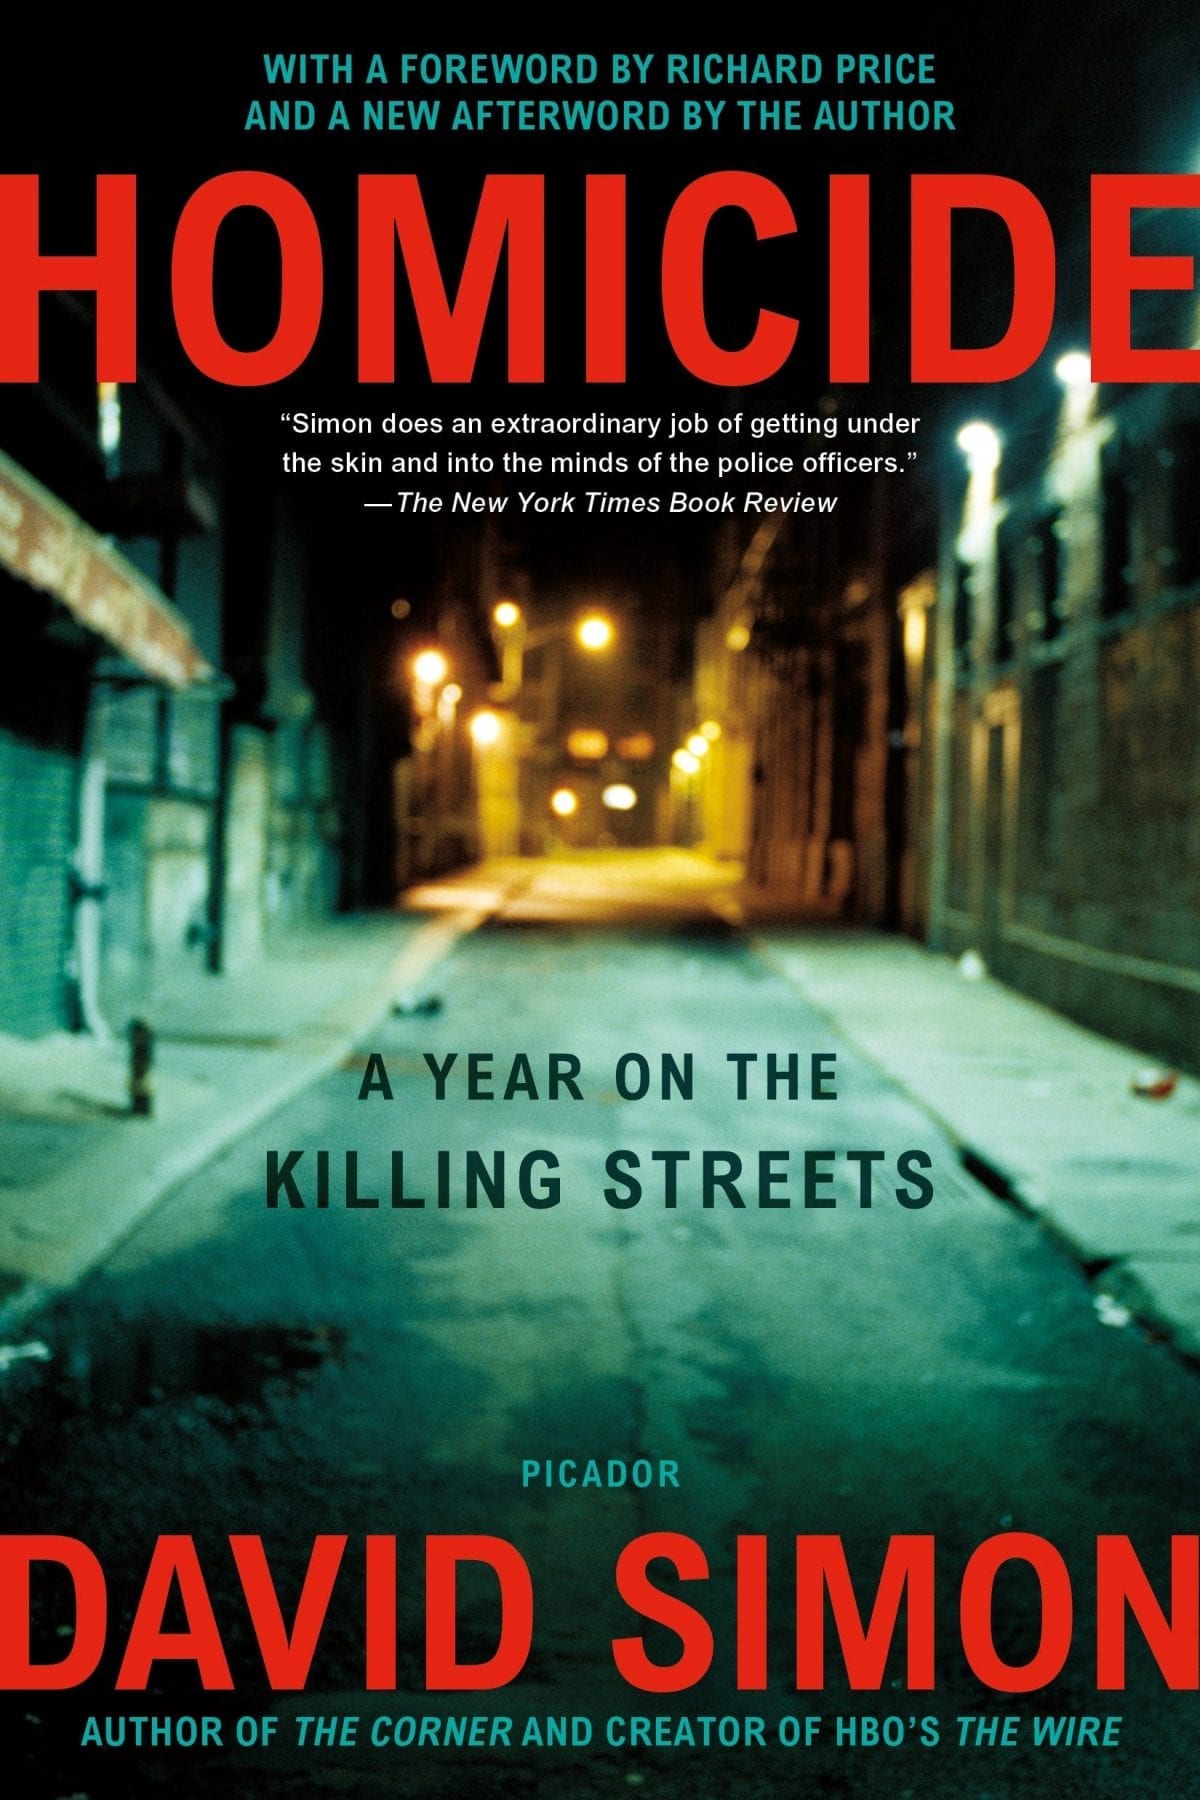 Homicide- A Year on the Killing Streets by David Simon